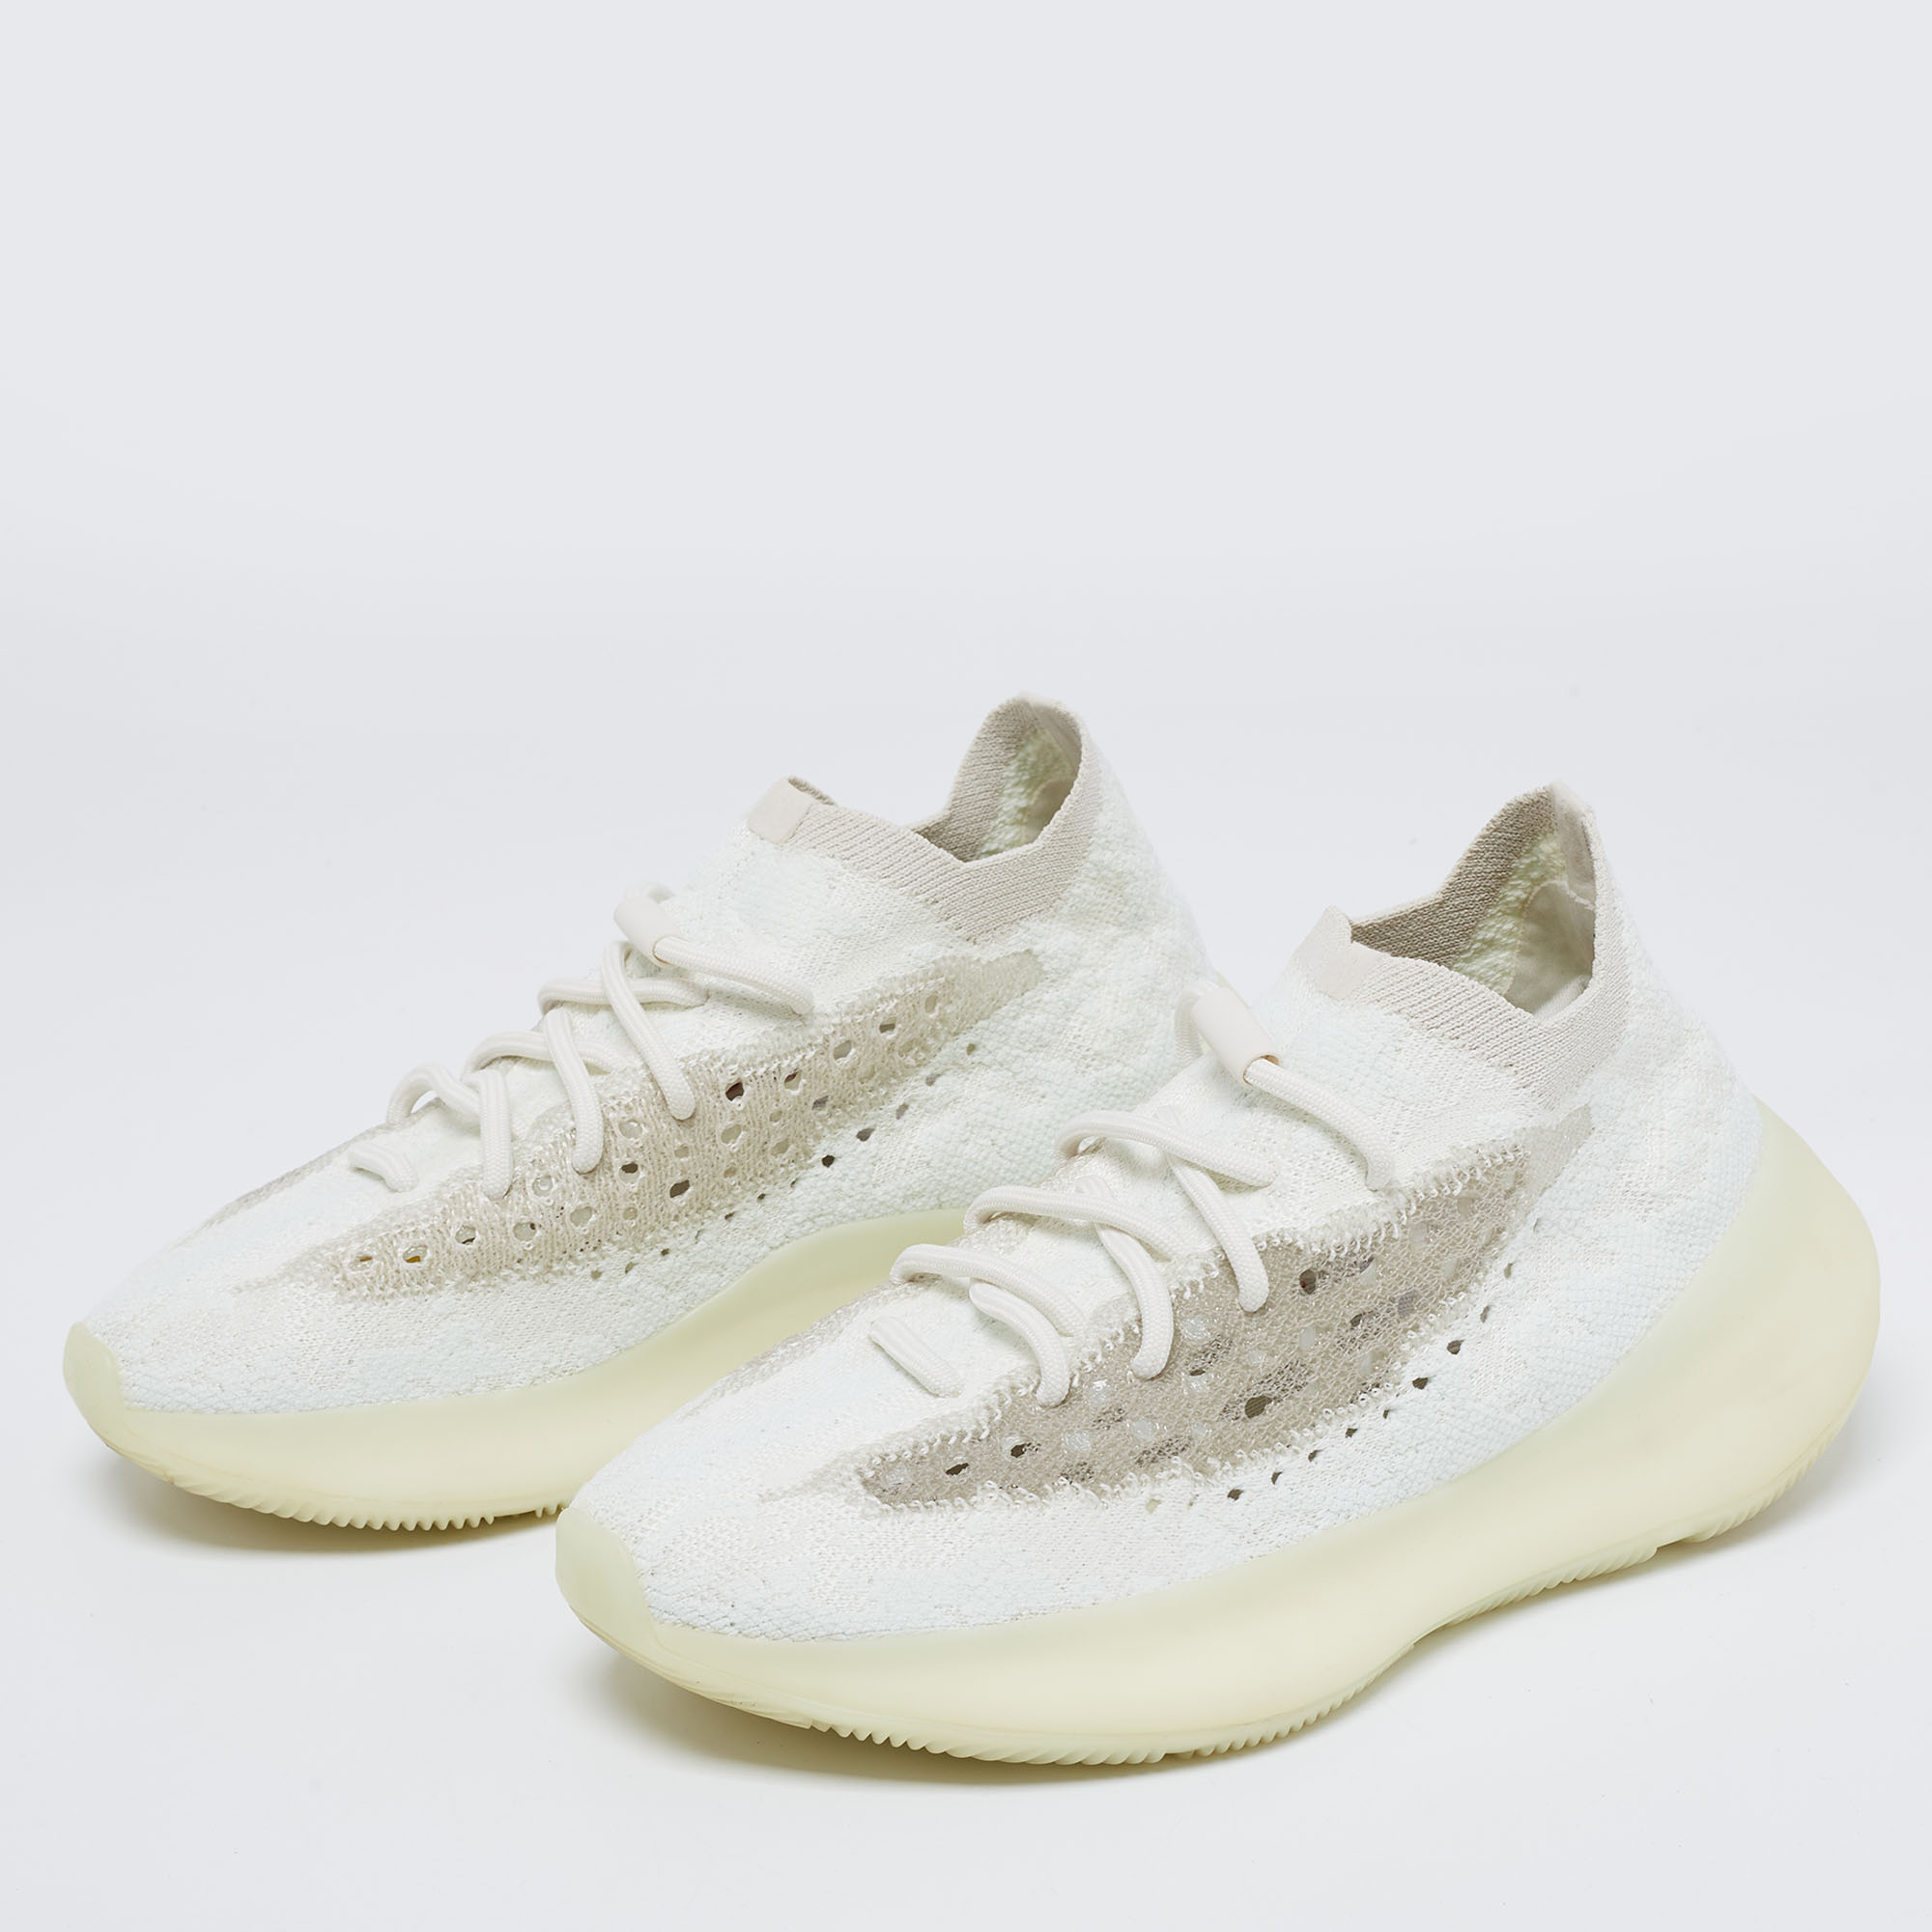 

Yeezy x Adidas Tri-Color Knit Fabric Boost 380 Calcite Glow Sneakers Size 39 1/3, White